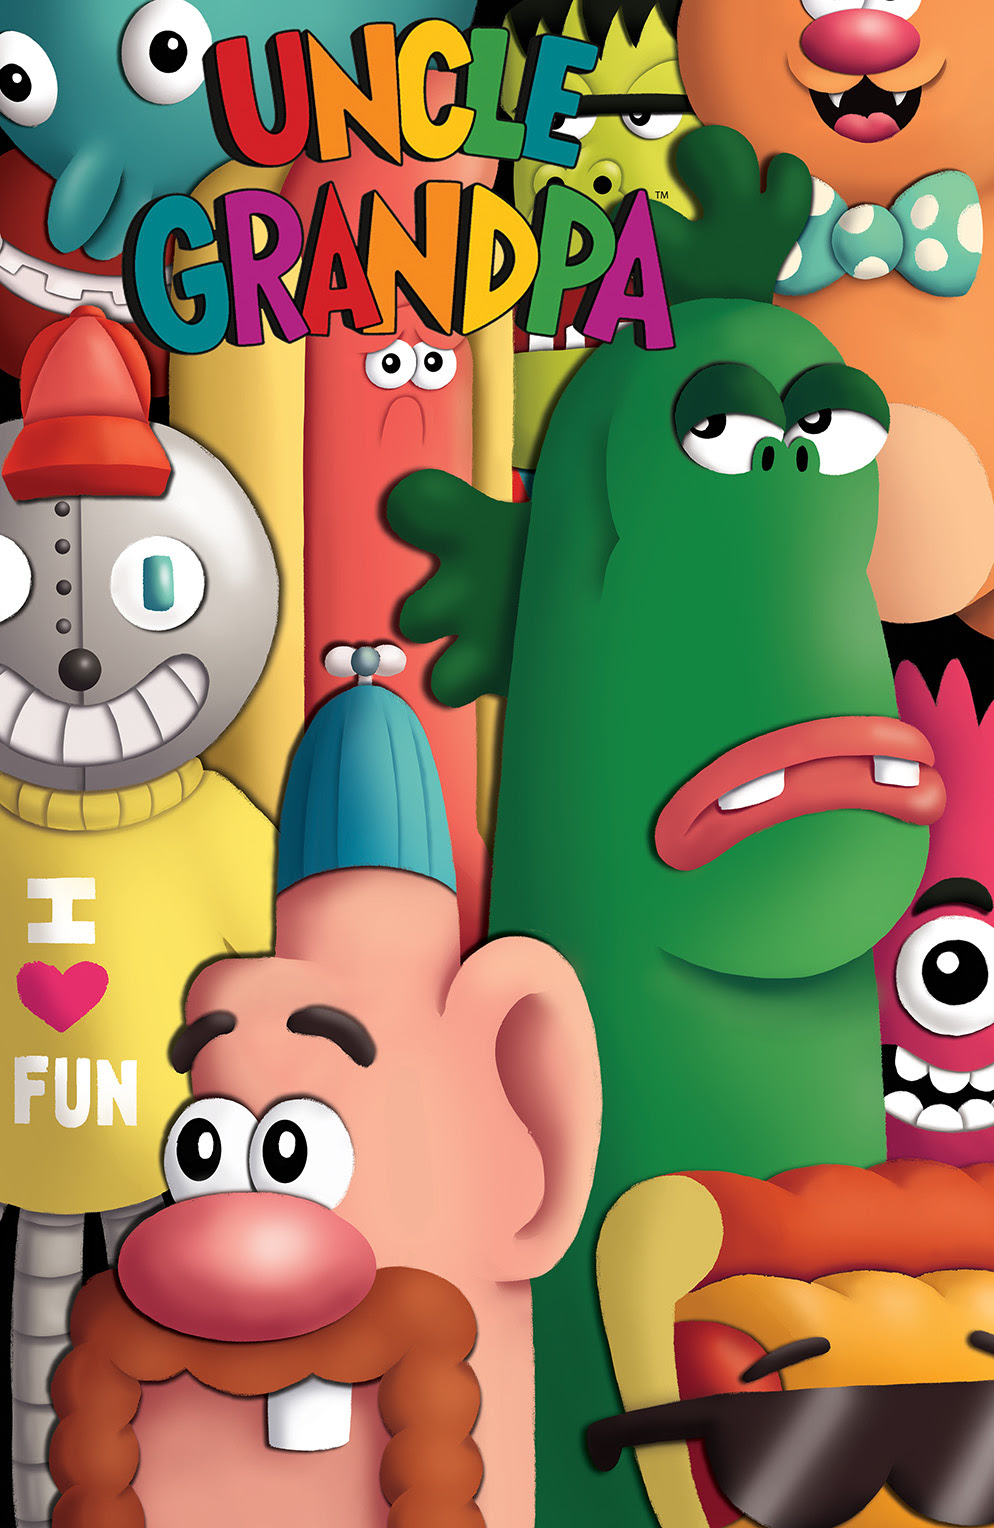 UNCLE GRANDPA #3 Cover B by Corey Fuller